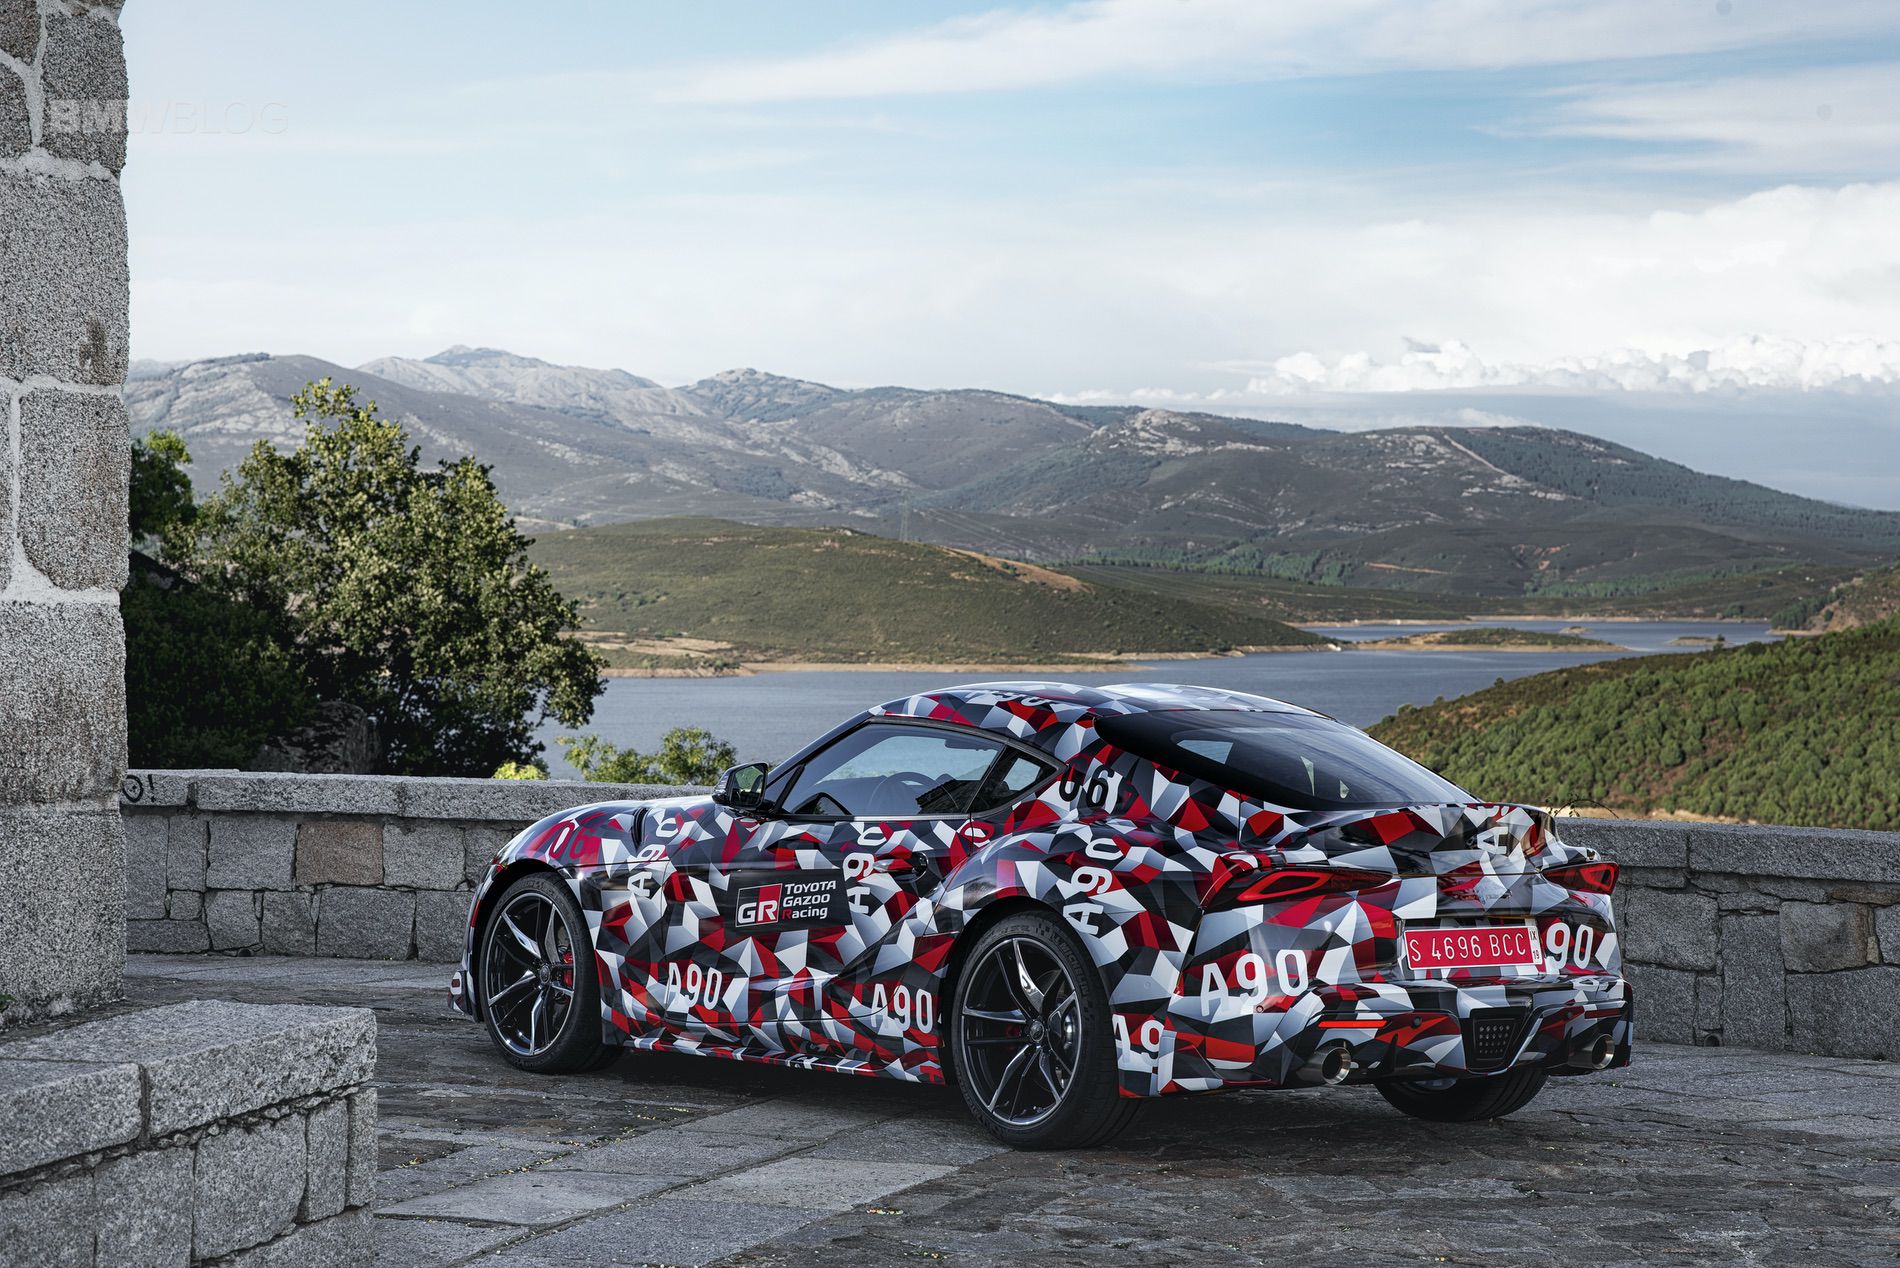 Toyota Supra Could Be Cheaper Than The Bmw Z4 M40i Is It The Better Buy I New Cars